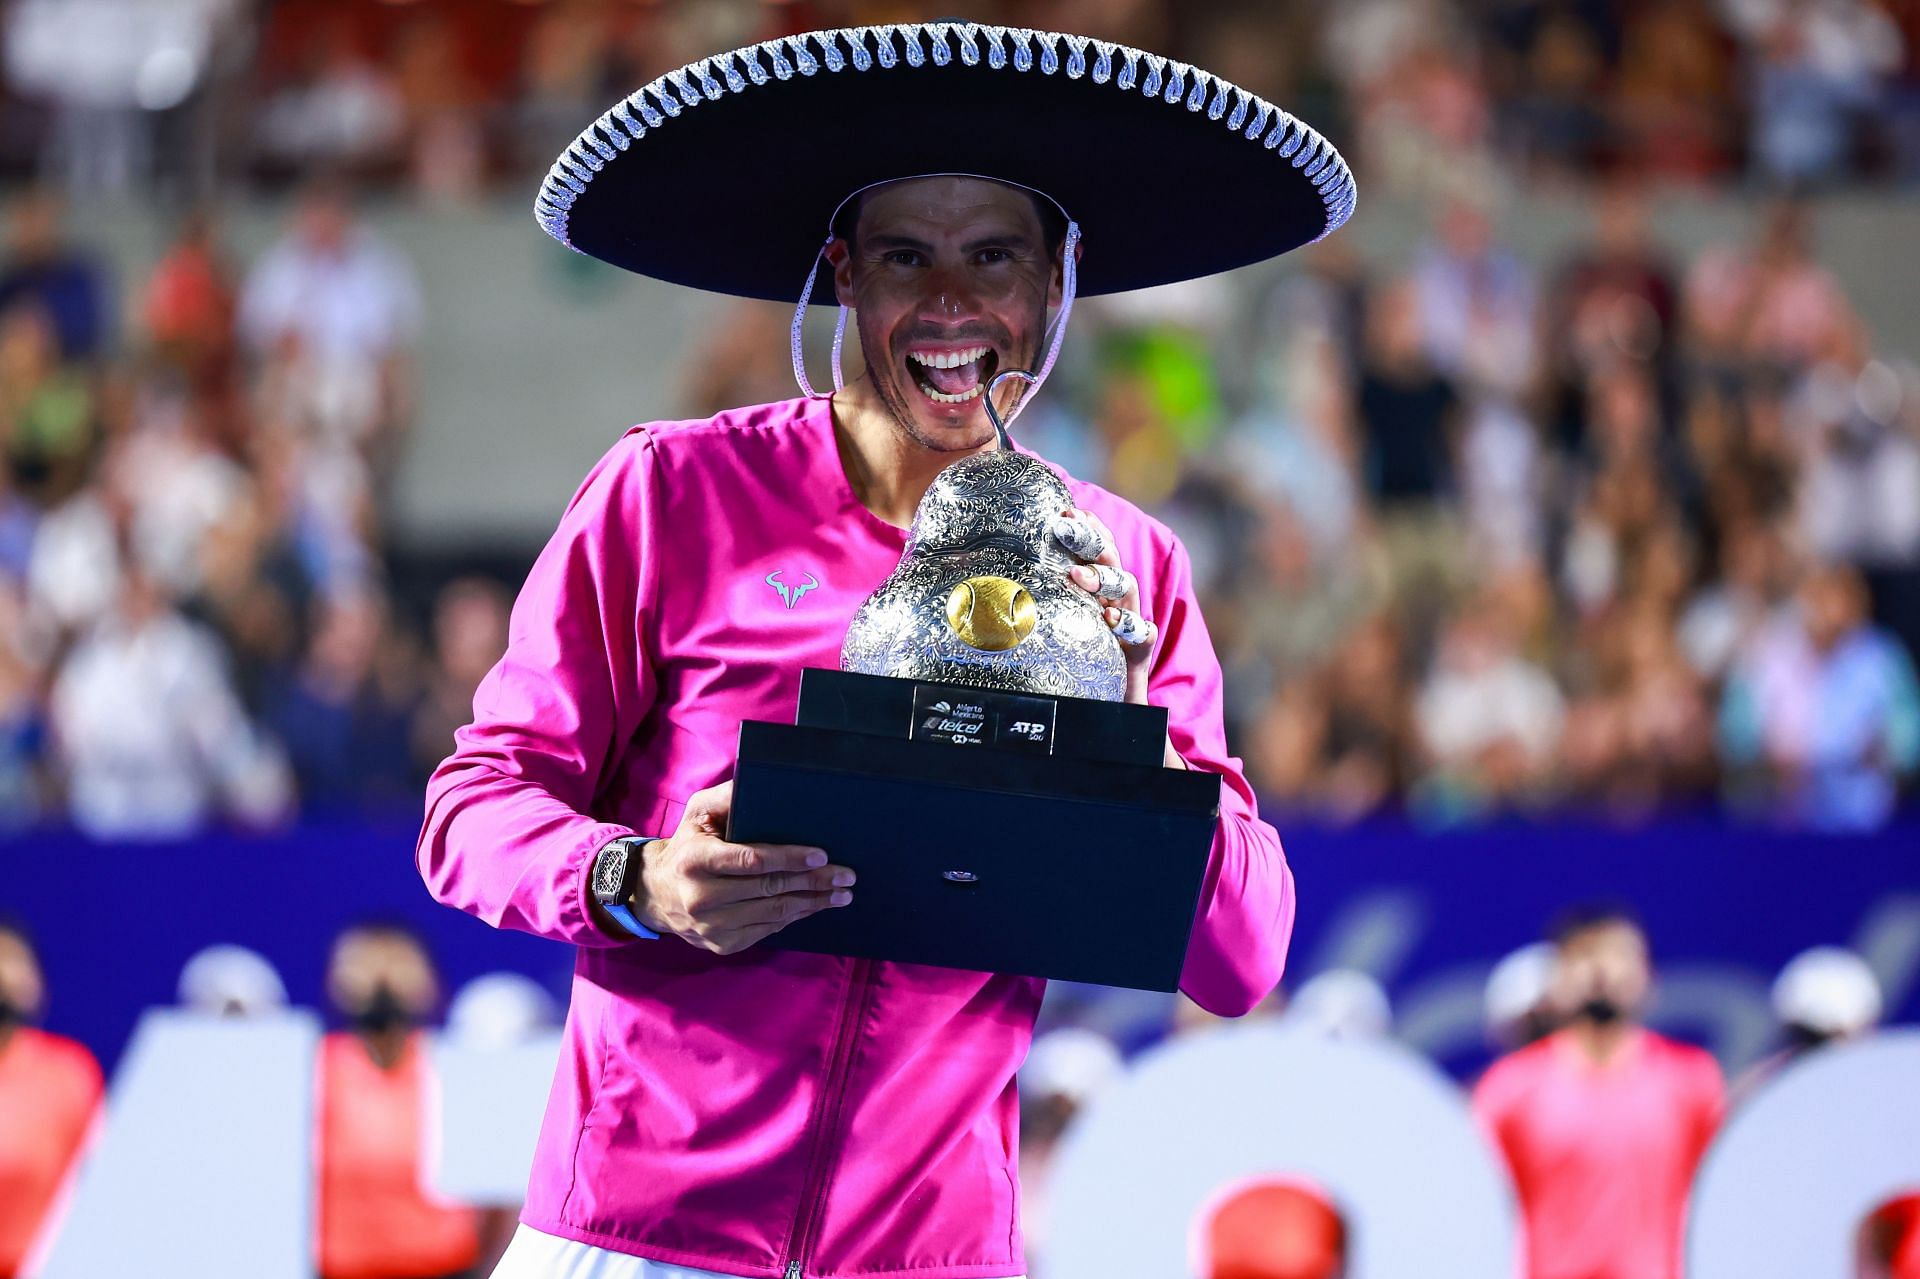 Rafael Nadal remarked that the welcome he received in Mexico was &quot;spectacular.&quot;